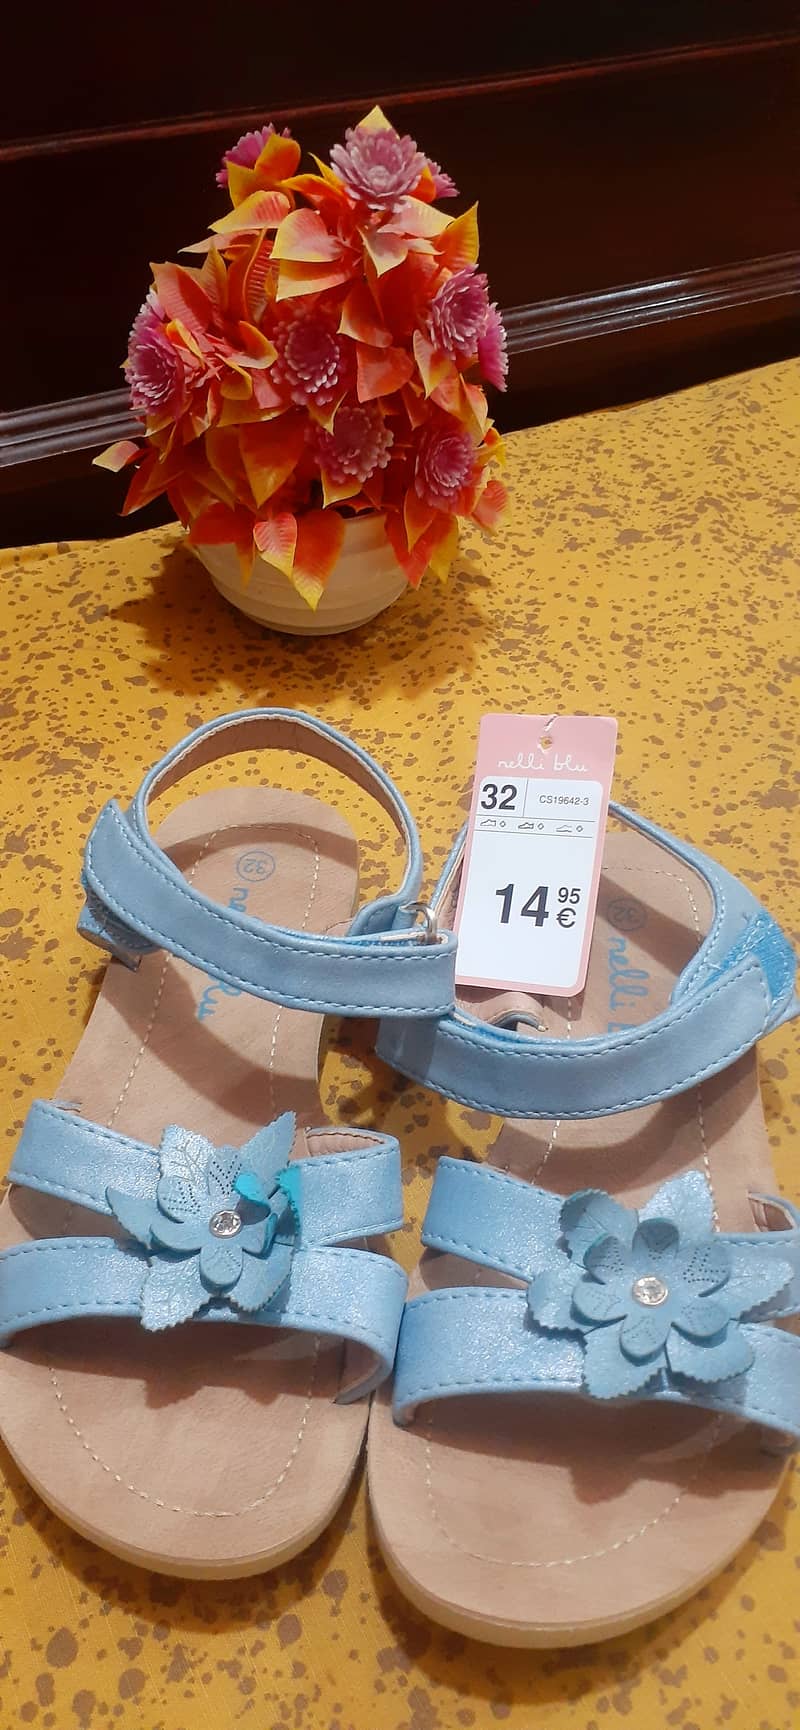 IMPORTED SANDLE FOR SALE (NELLI BLU) 1